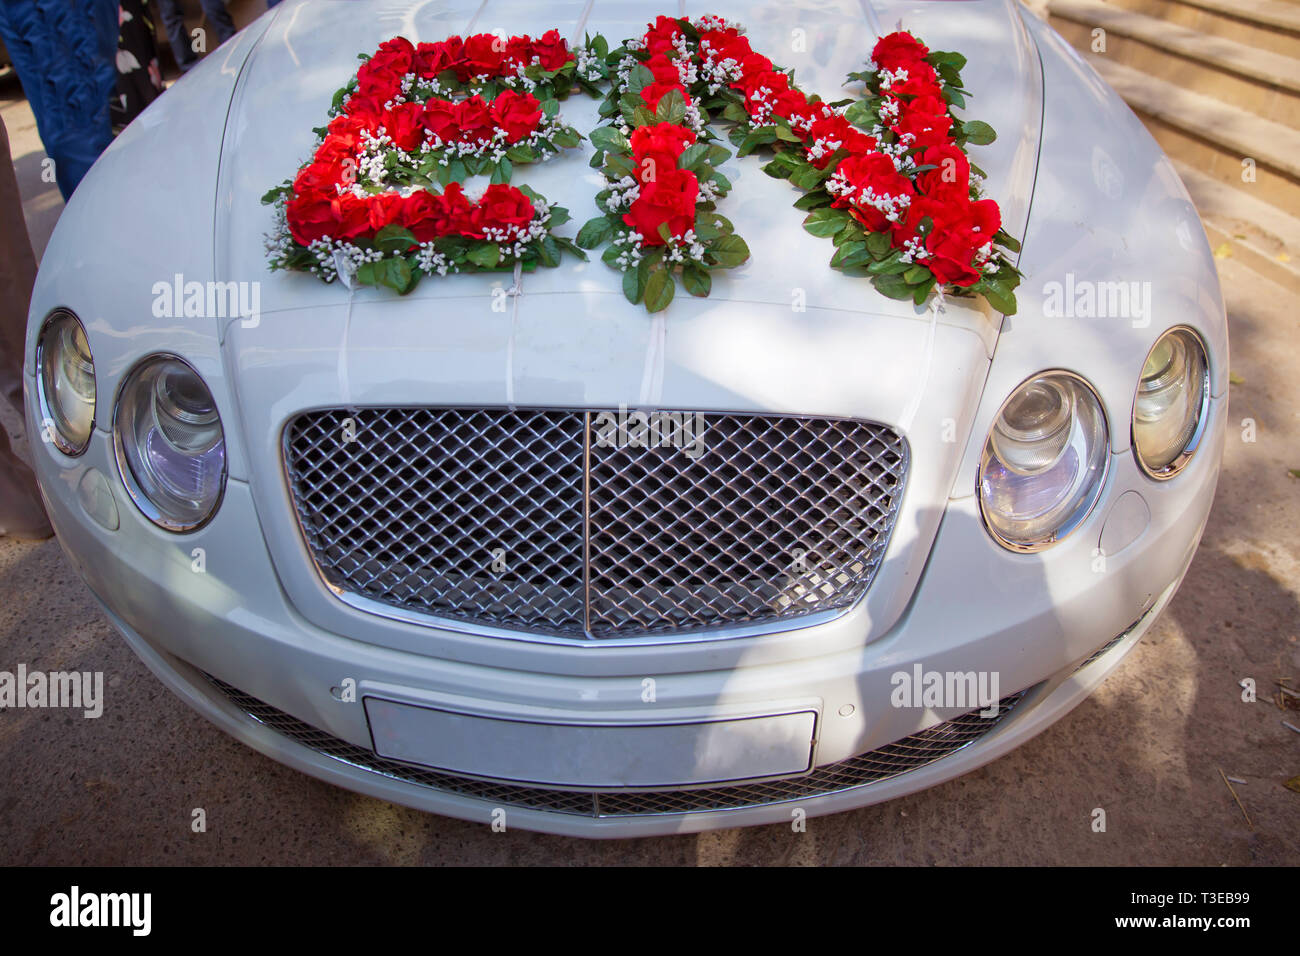 Closeup image of wedding car decoration with red and white flowers ...